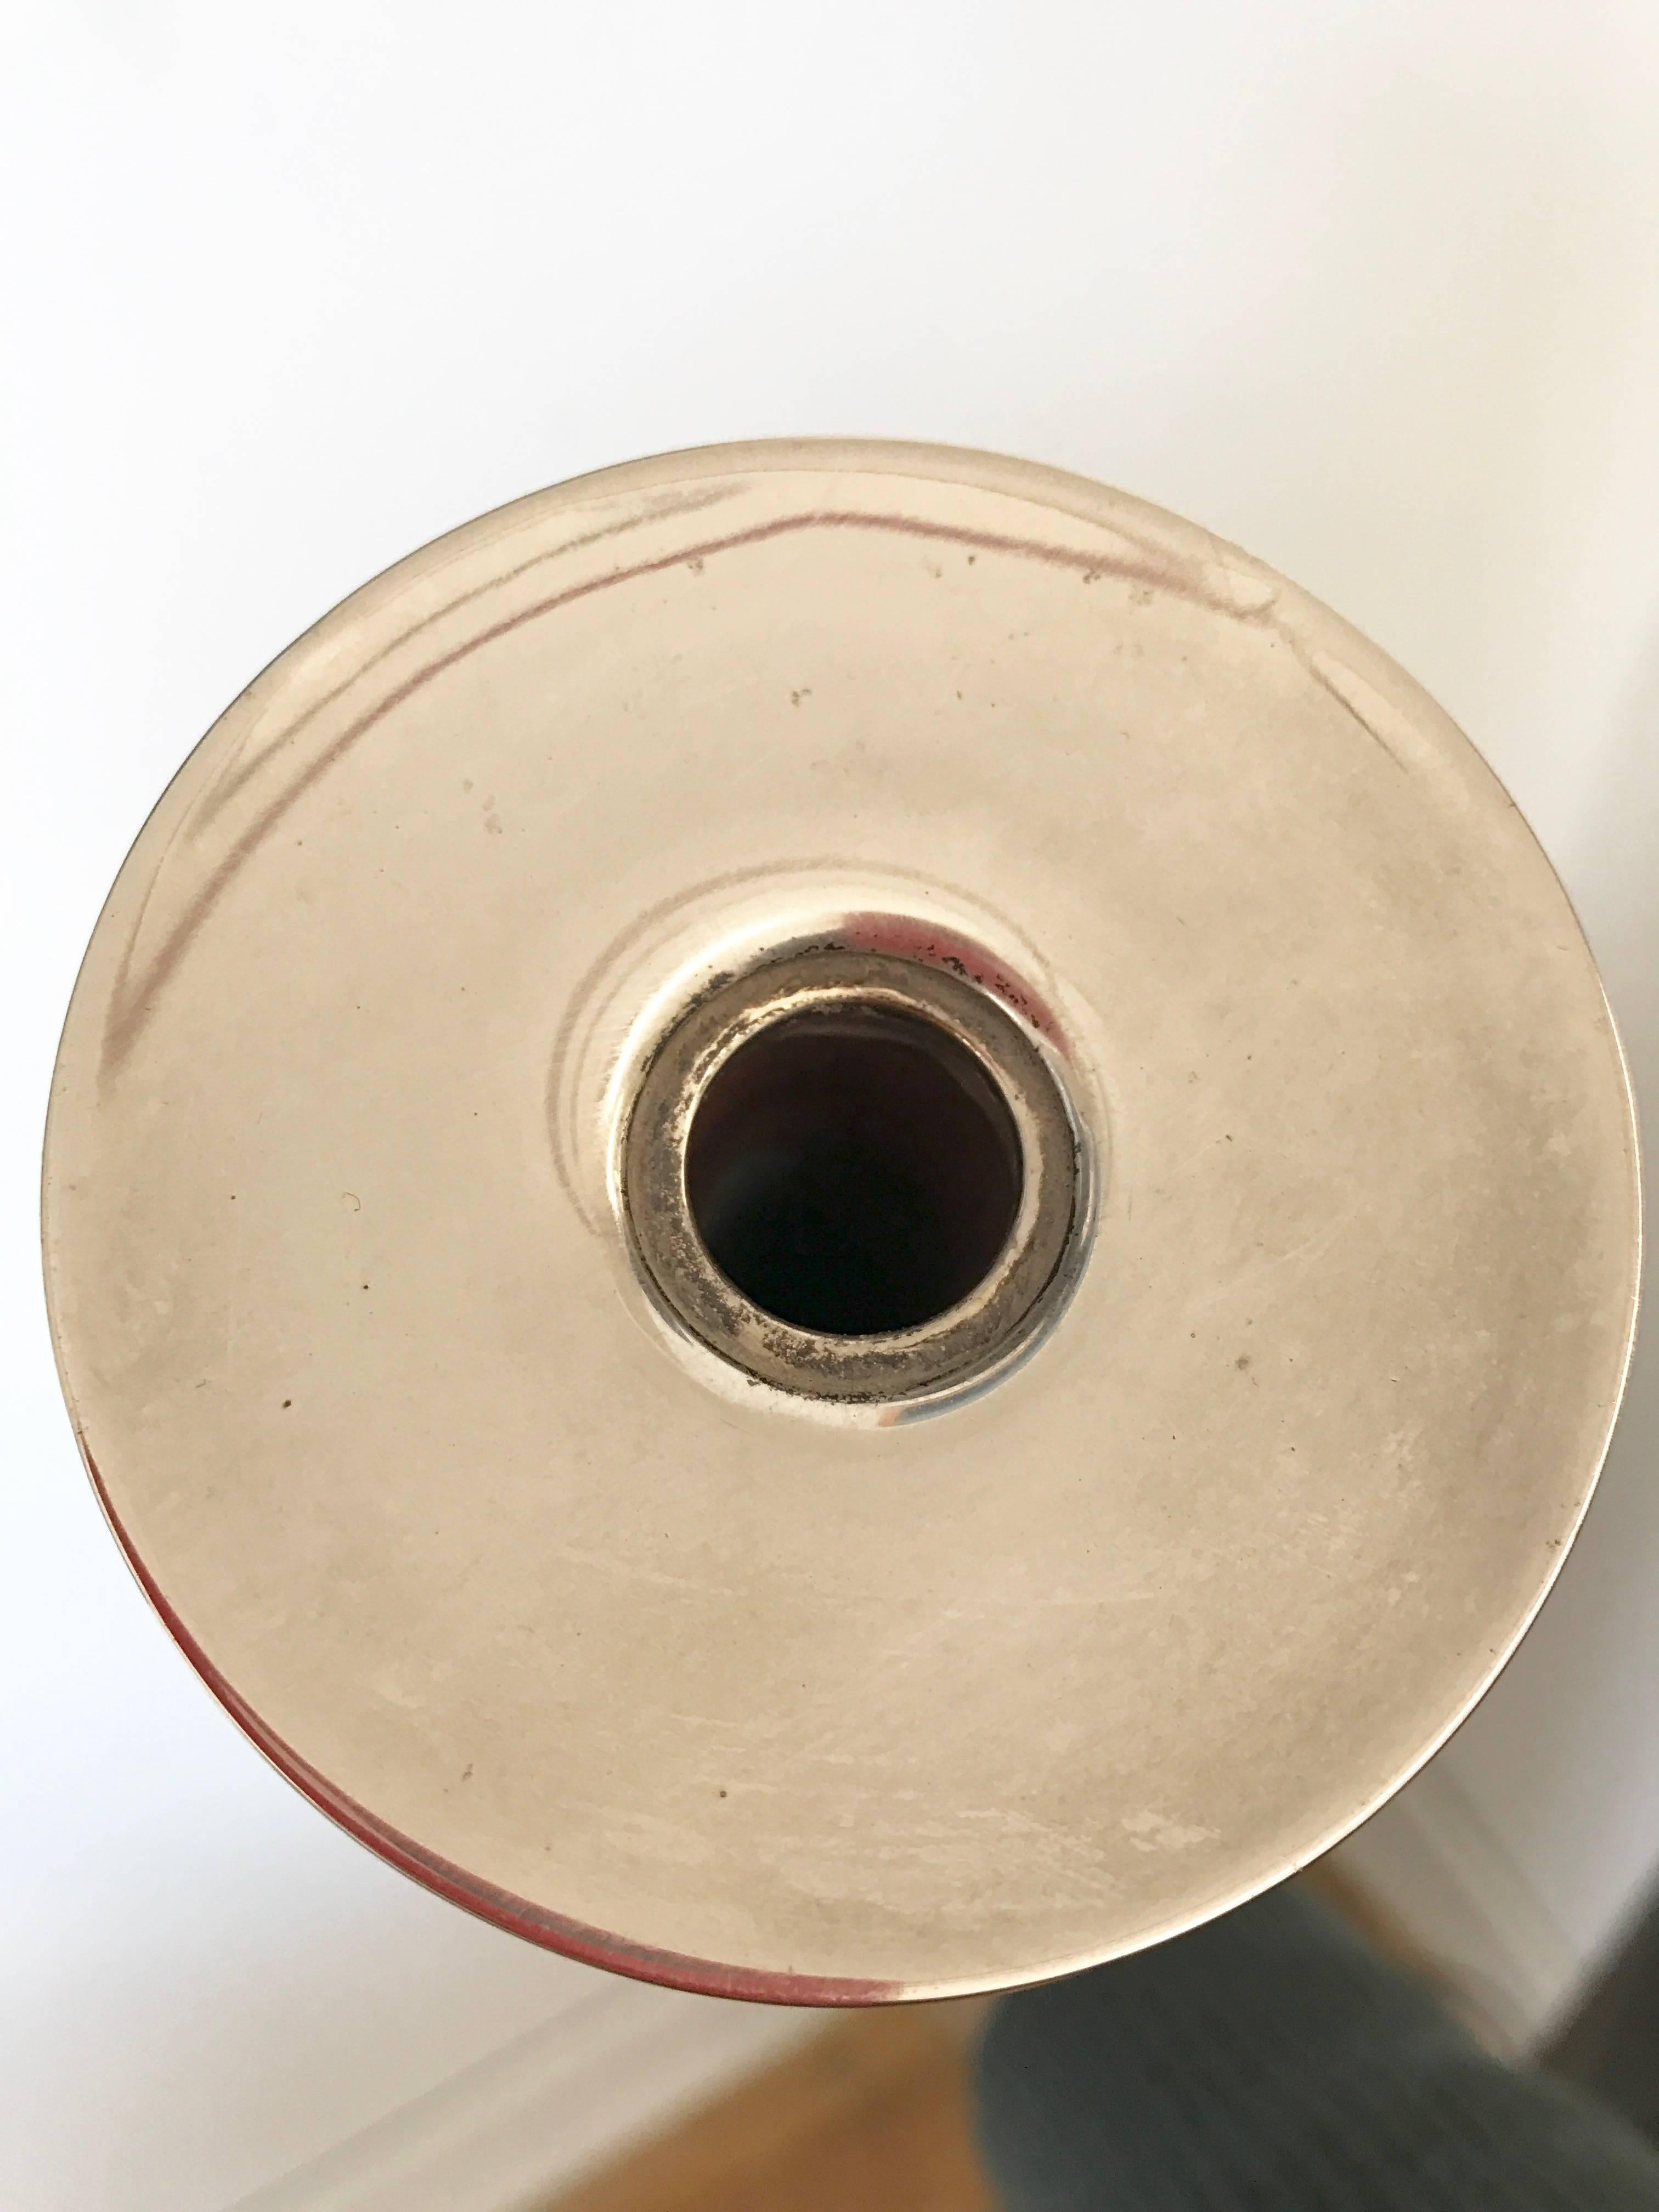 Silver plated candleholder by Lino Sabattini.
From Reggio Emilia, Italy, Sabattini worked with Gio Ponti and many other architects and designers. He mastered the crafts thanks to influences by Ponti and Rolando Hettner. a pottery maker from